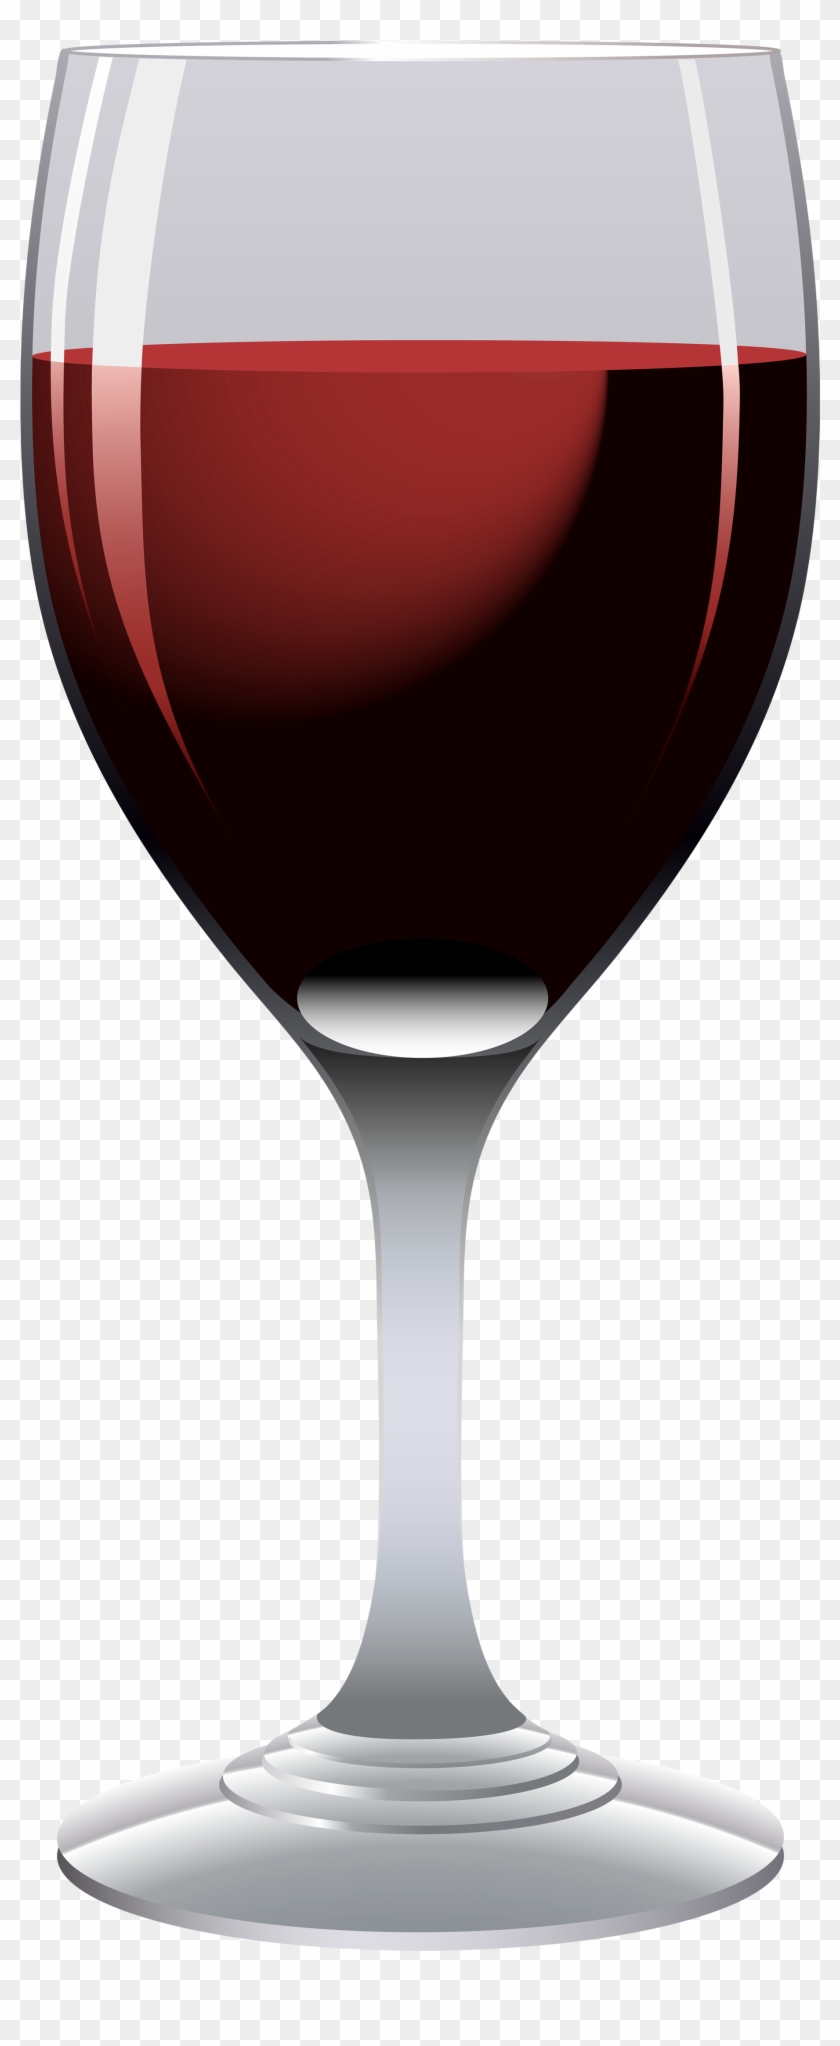 Red Wine Glass Png Clipart Image - Glass Of Red Wine Vector #388592